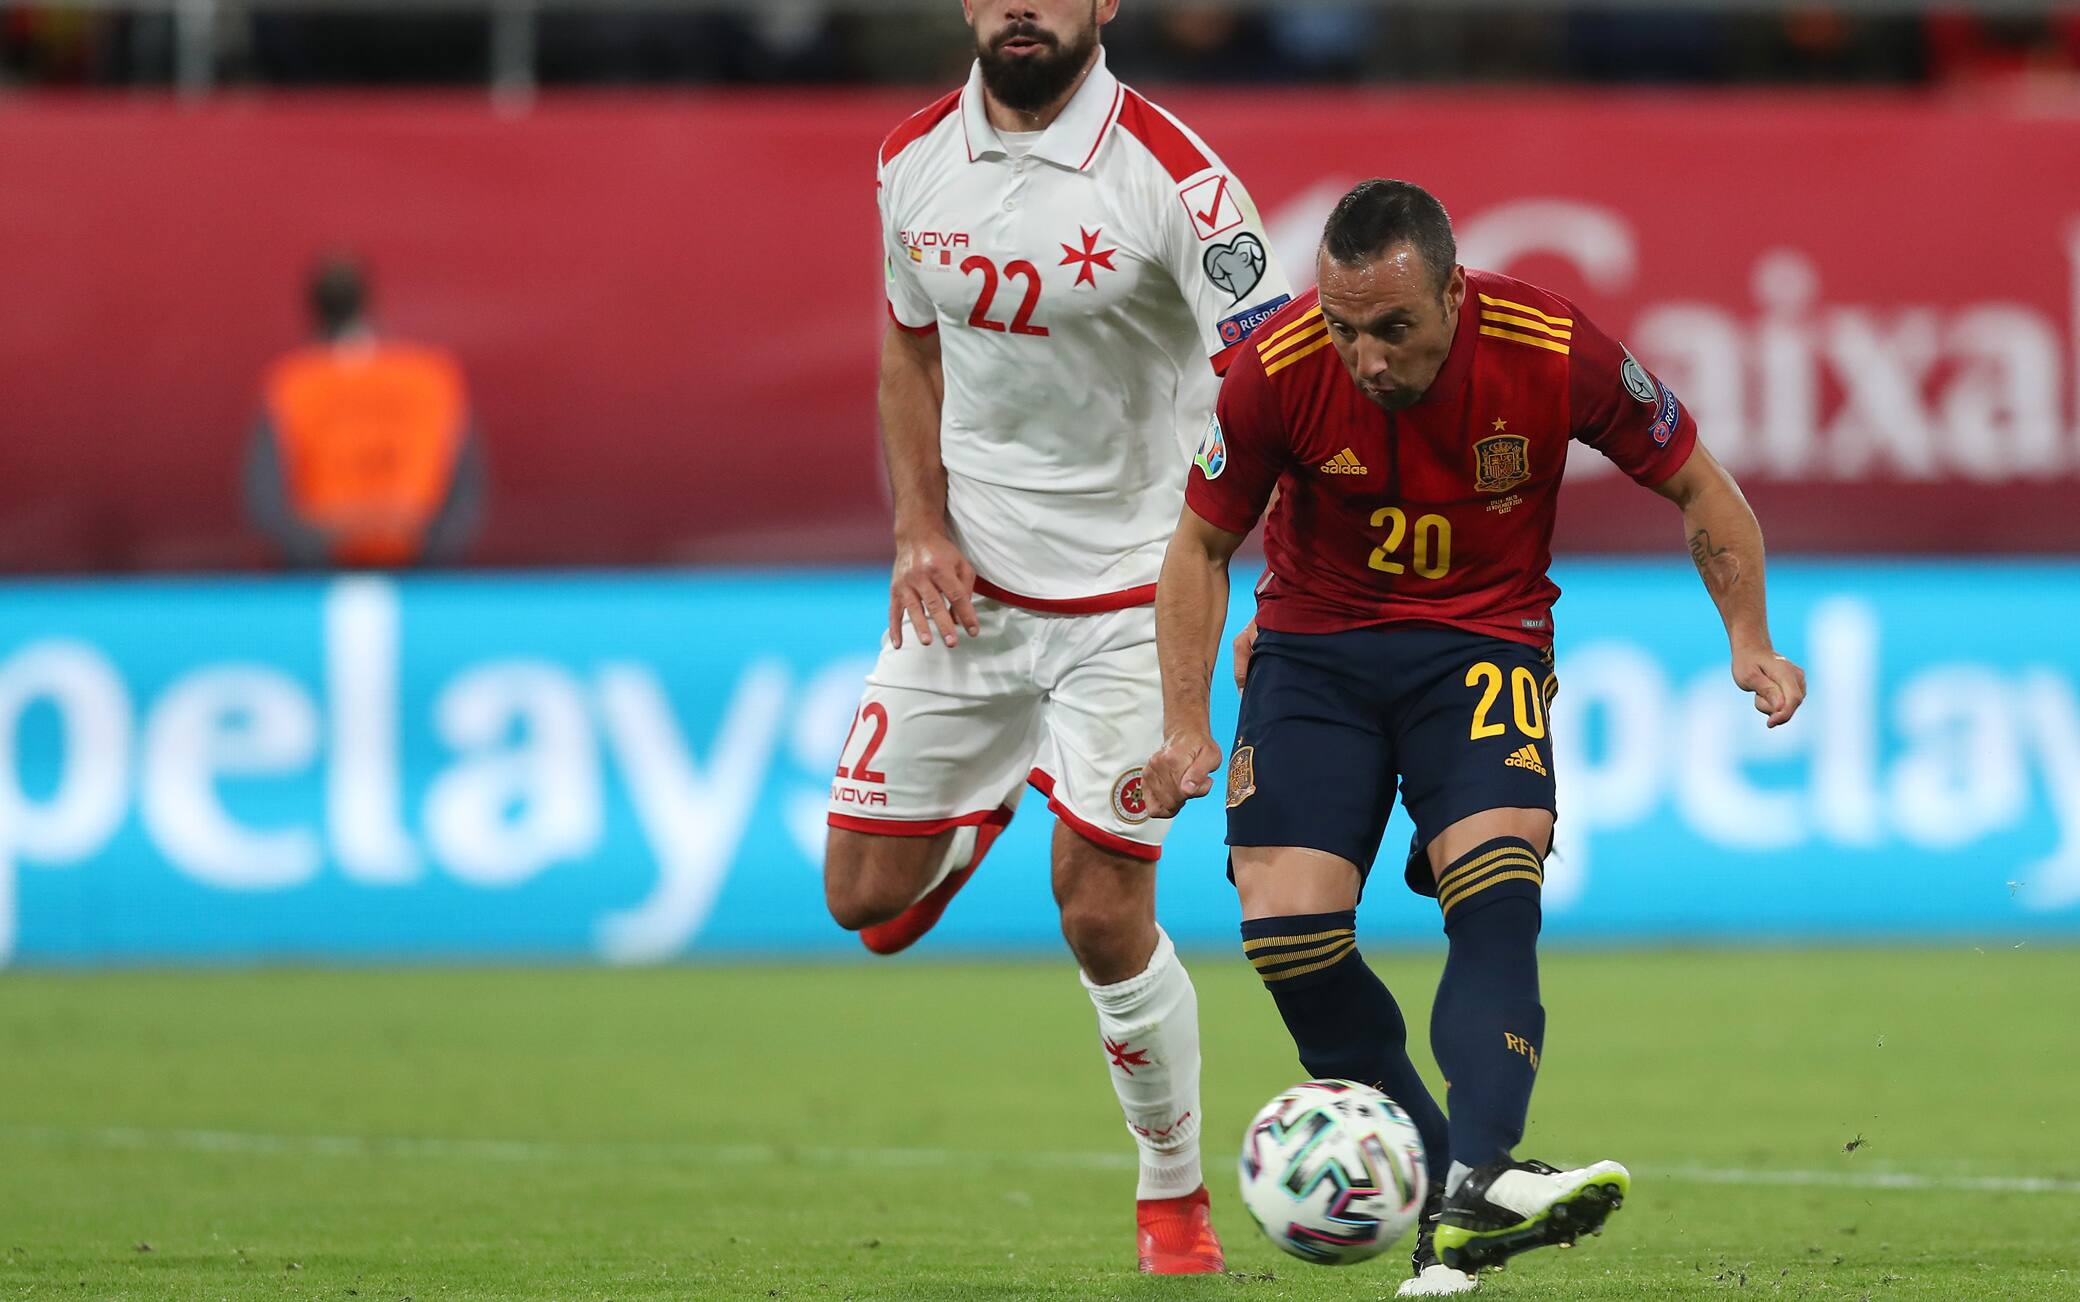 CADIZ, SPAIN - NOVEMBER 15: Santi Cazorla of Spain scores his team's second goal during the UEFA Euro 2020 Qualifier between Spain and Malta on November 15, 2019 in Cadiz, Spain. (Photo by Angel Martinez/Getty Images)